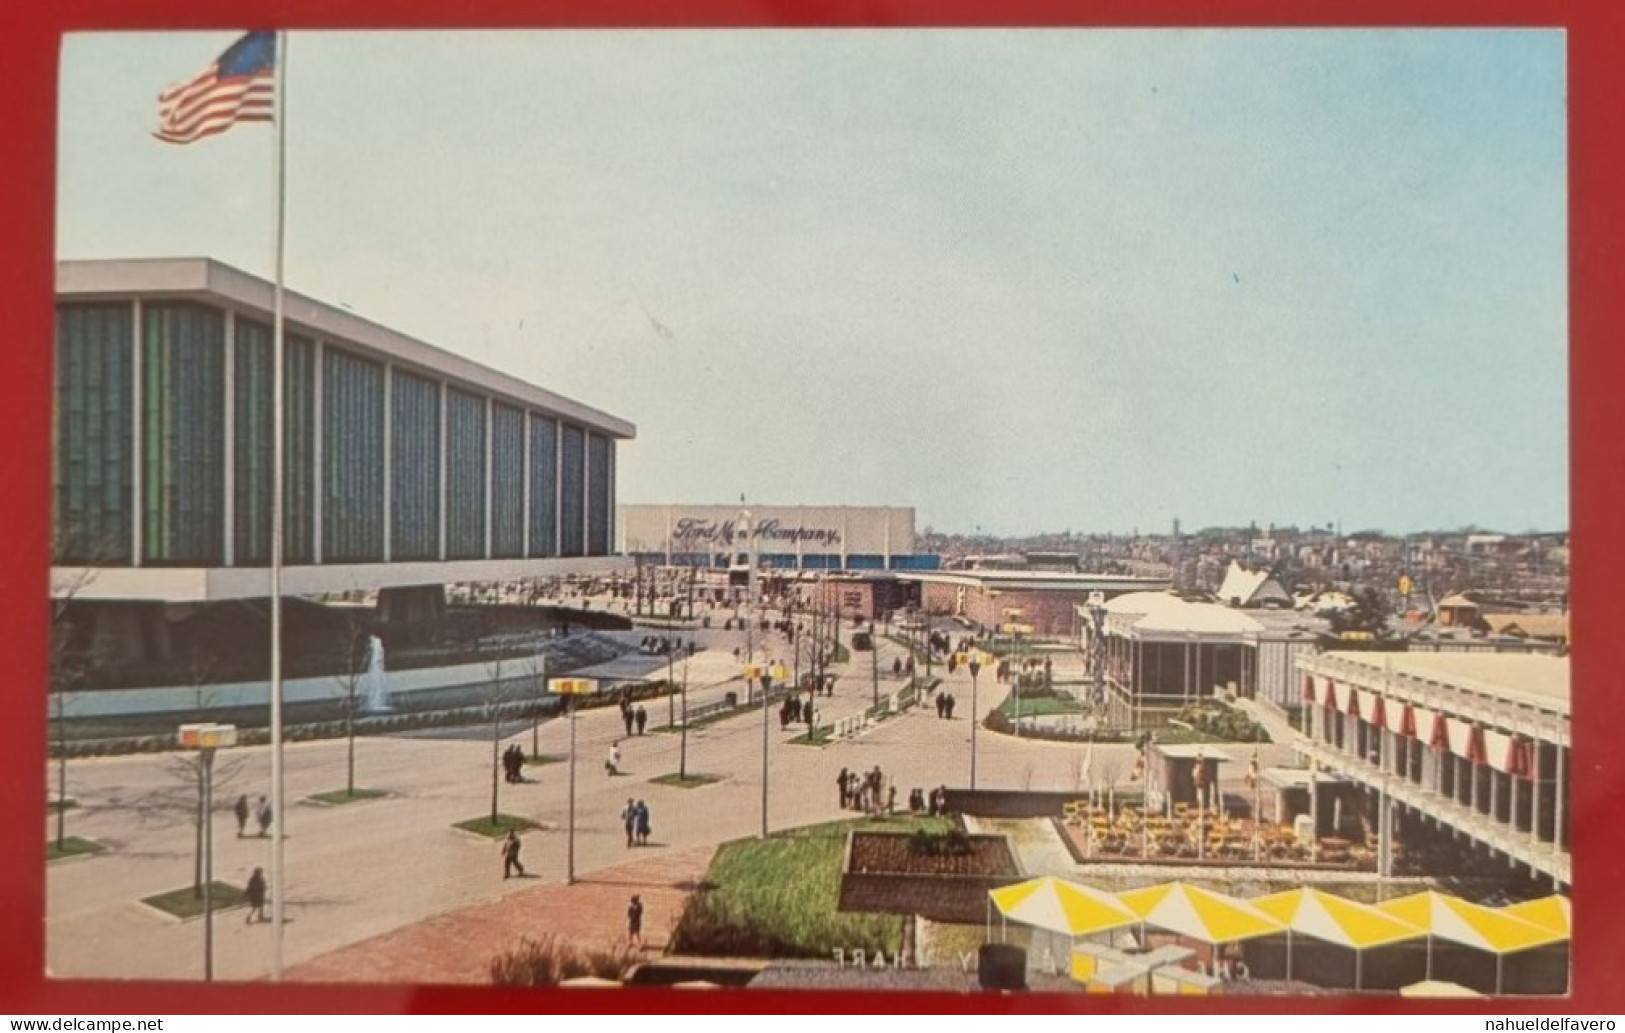 Uncirculated Postcard - USA - NY, NEW YORK WORLD'S FAIR 1964-65 - KENNEDY CIRCLE LOOKING SOUTHWEST - Expositions